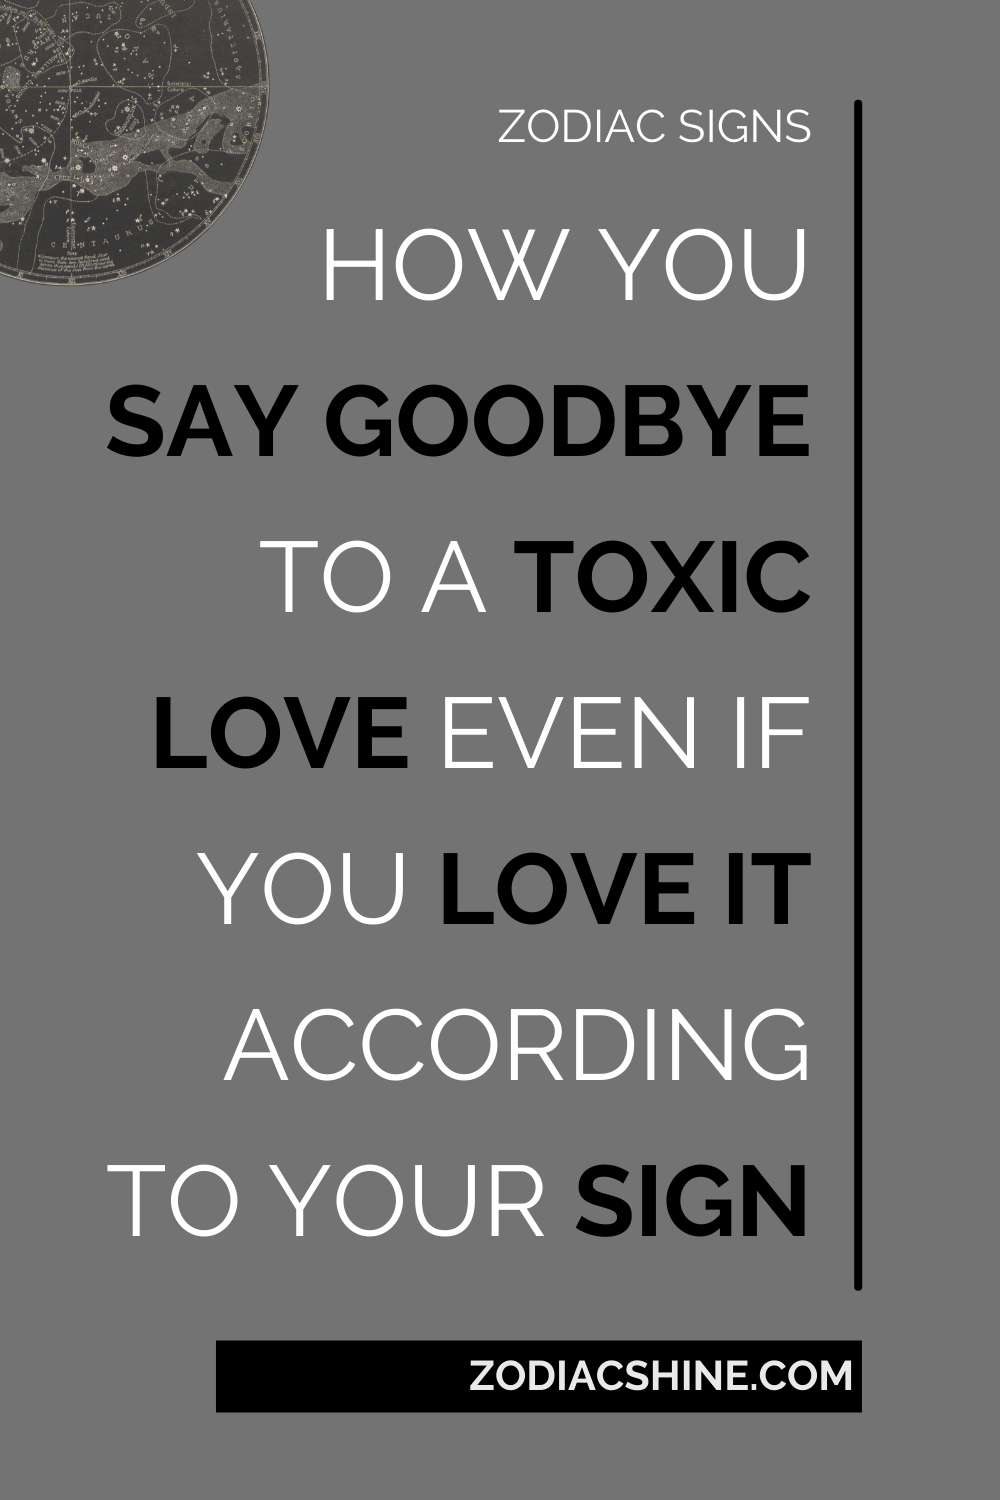 How You Say Goodbye To A Toxic Love Even If You Love It According To Your Sign